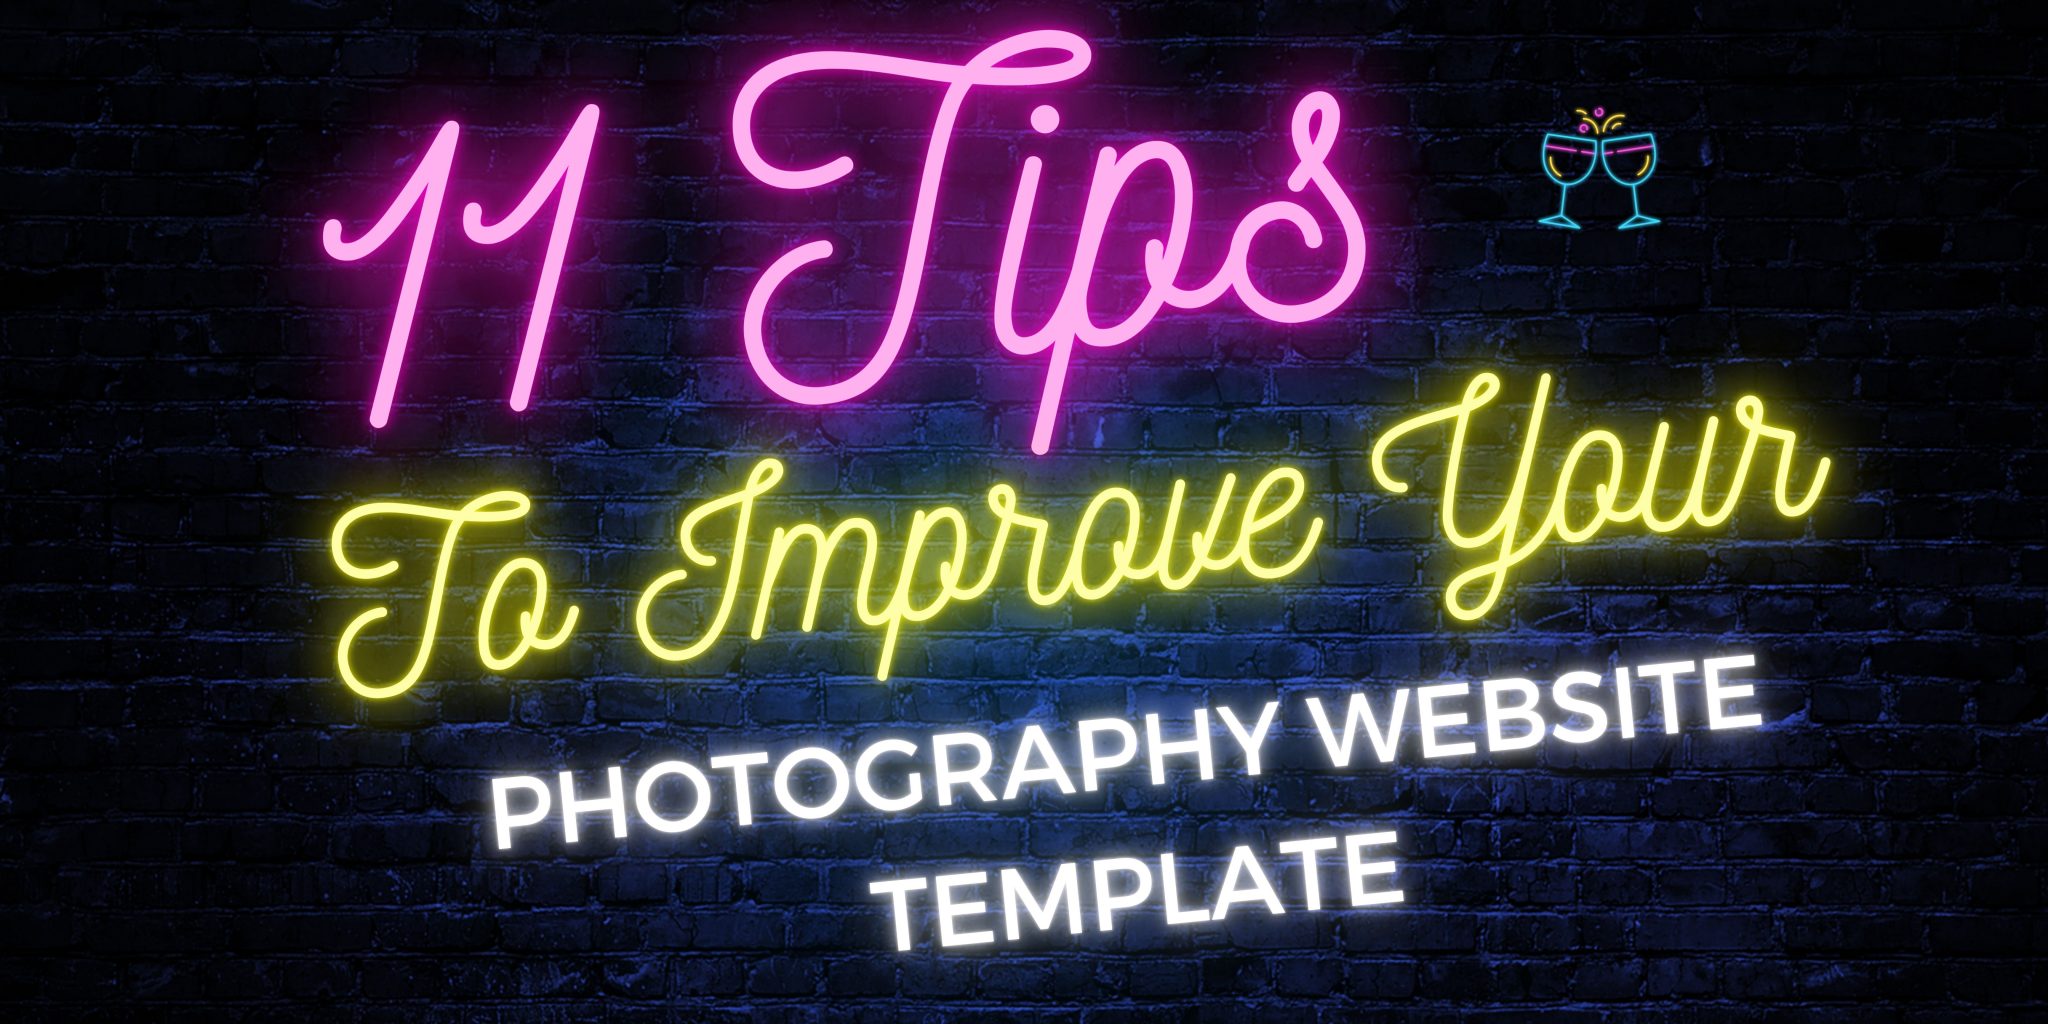 11-tips-to-improve-your-photography-website-template